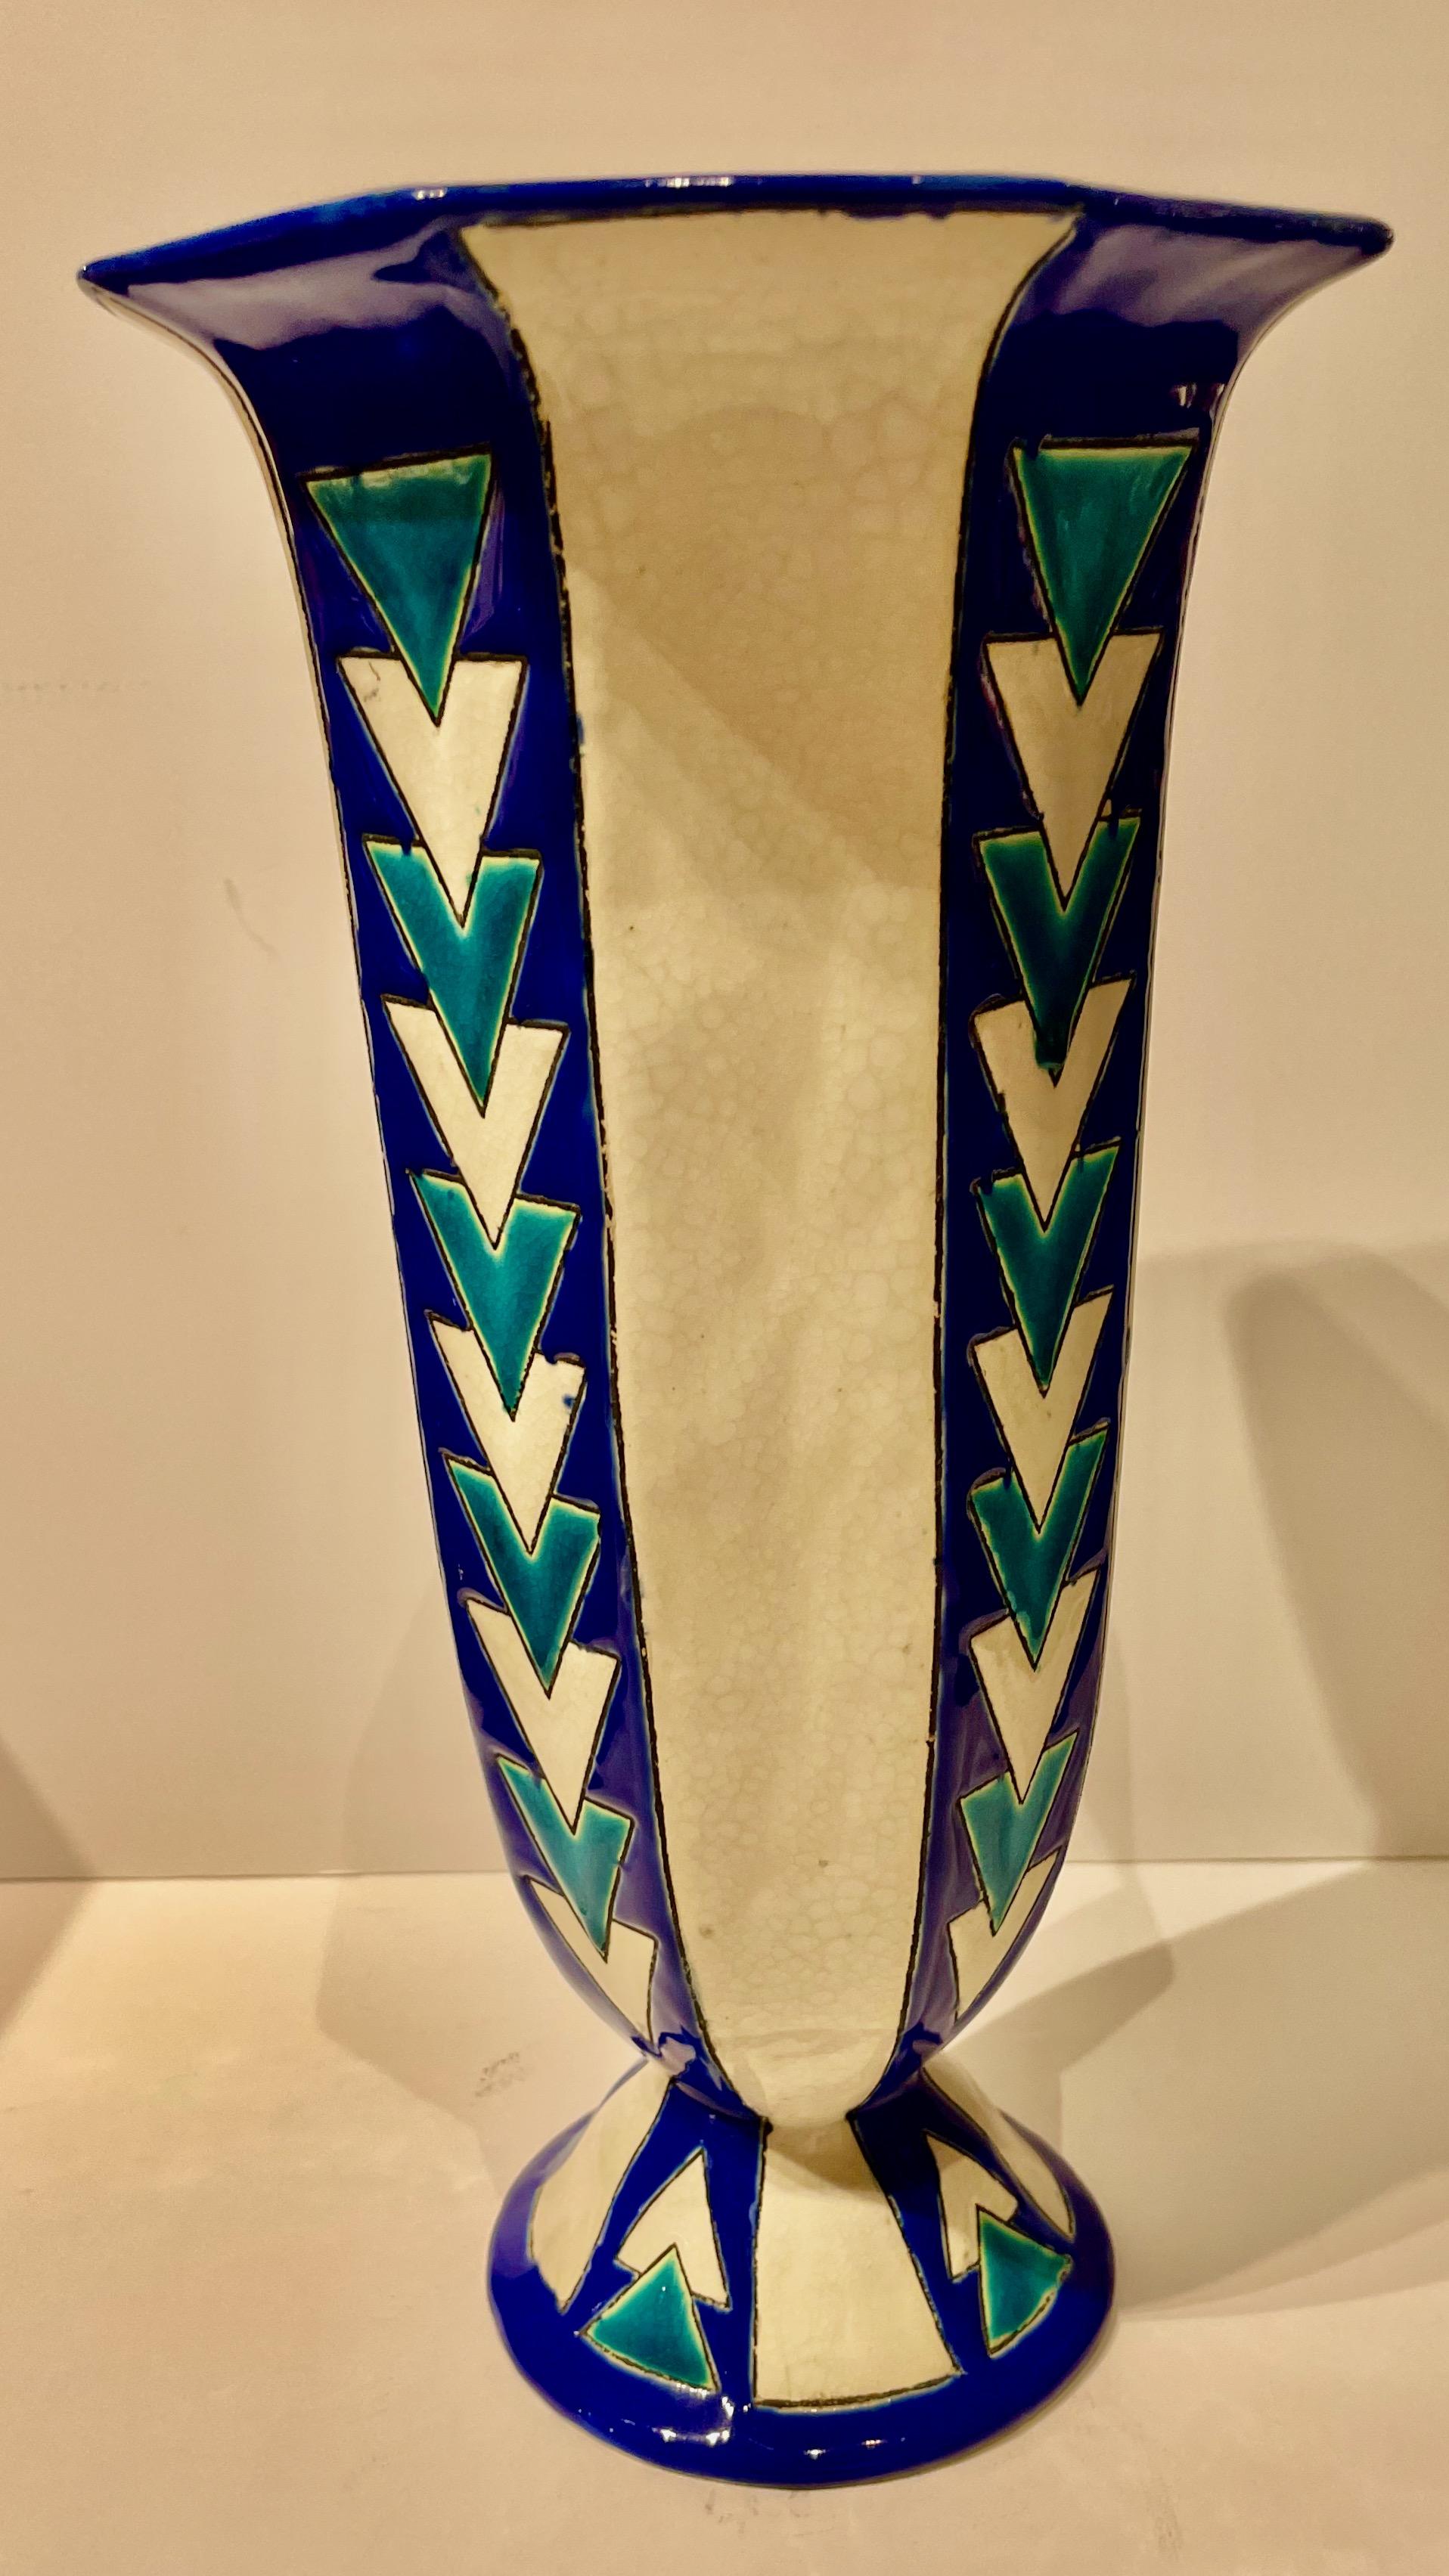 A highly stylized Art Deco vase by the master ceramicist, Charles Catteau of Boch Pottery. The bold use of bright colors in the technique known as ceramic cloisonné makes a strong statement in this very collectible piece. Strong geometric design